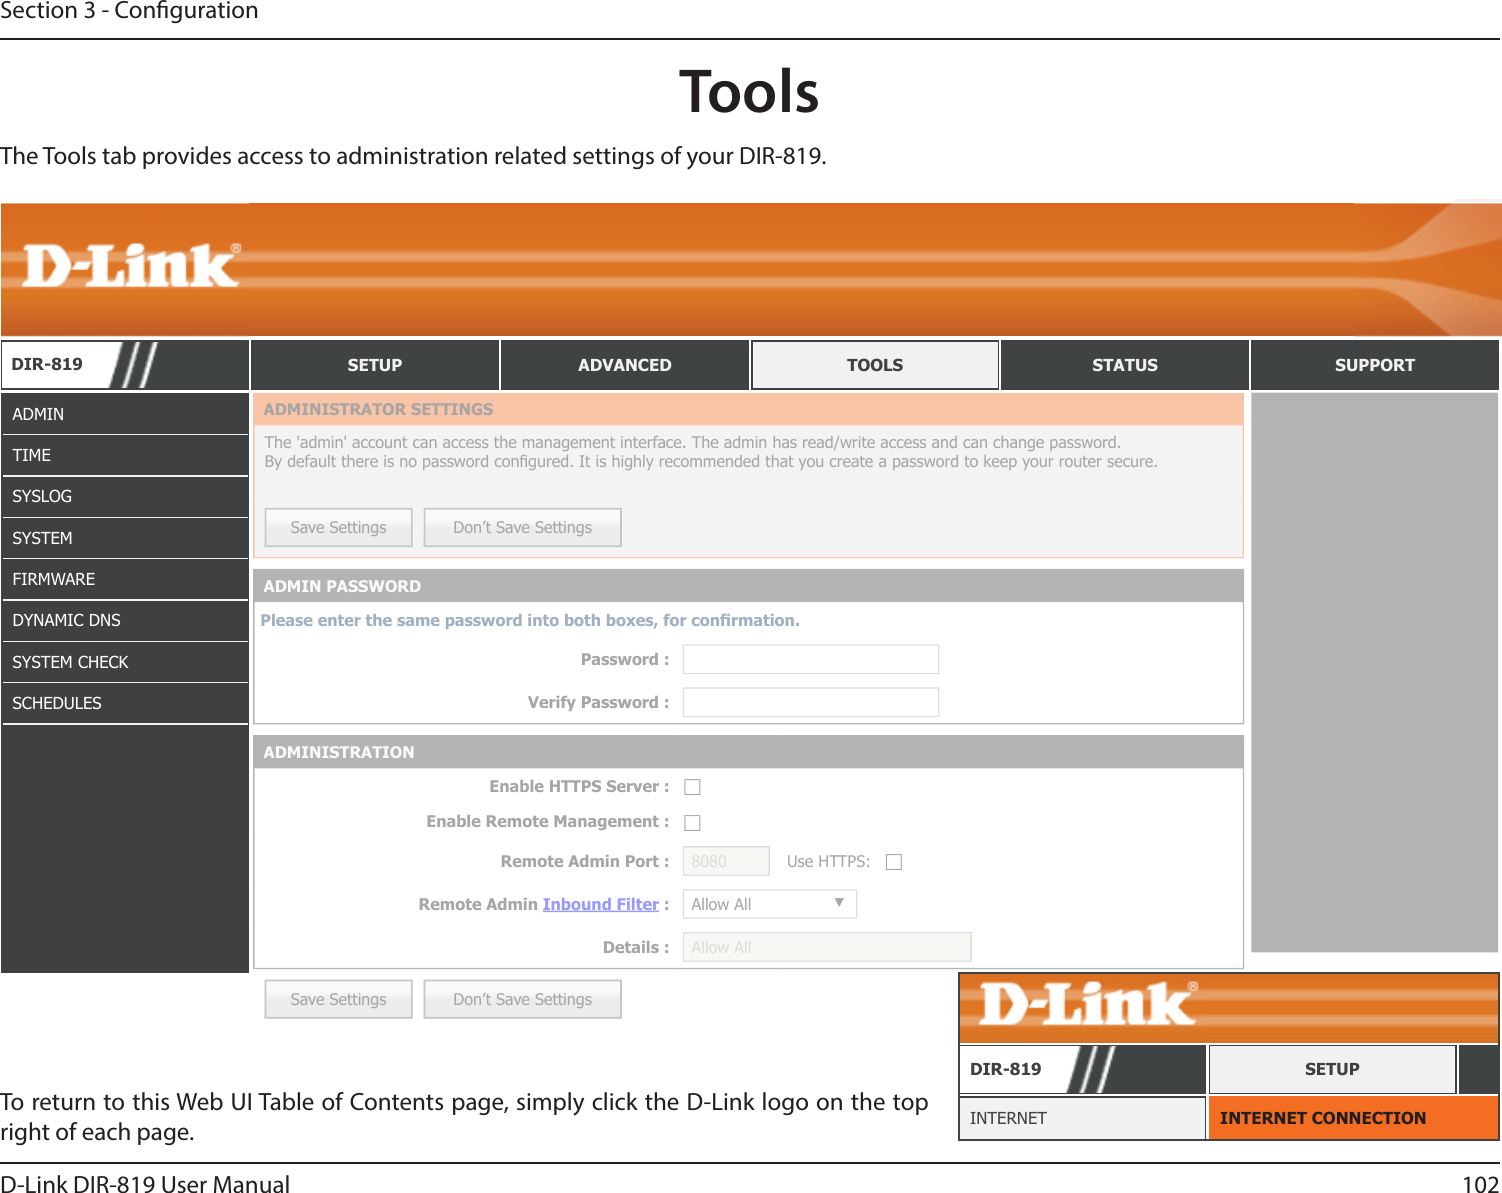 102D-Link DIR-819 User ManualSection 3 - CongurationToolsADMINTIMESYSLOGSYSTEMFIRMWAREDYNAMIC DNSSYSTEM CHECKSCHEDULESTo return to this Web UI Table of Contents page, simply click the D-Link logo on the top right of each page. INTERNET CONNECTIONINTERNETDIR-819 SETUPThe Tools tab provides access to administration related settings of your DIR-819.DIR-819 SETUP ADVANCED TOOLS STATUS SUPPORTSave Settings Don’t Save SettingsADMINISTRATOR SETTINGSThe &apos;admin&apos; account can access the management interface. The admin has read/write access and can change password. By default there is no password congured. It is highly recommended that you create a password to keep your router secure. Save Settings Don’t Save SettingsADMIN PASSWORDPlease enter the same password into both boxes, for conrmation.Password :Verify Password :ADMINISTRATIONEnable HTTPS Server : ☐Enable Remote Management : ☐Remote Admin Port : 8080 Use HTTPS: ☐Remote Admin Inbound Filter : Allow All ▼Details : Allow All